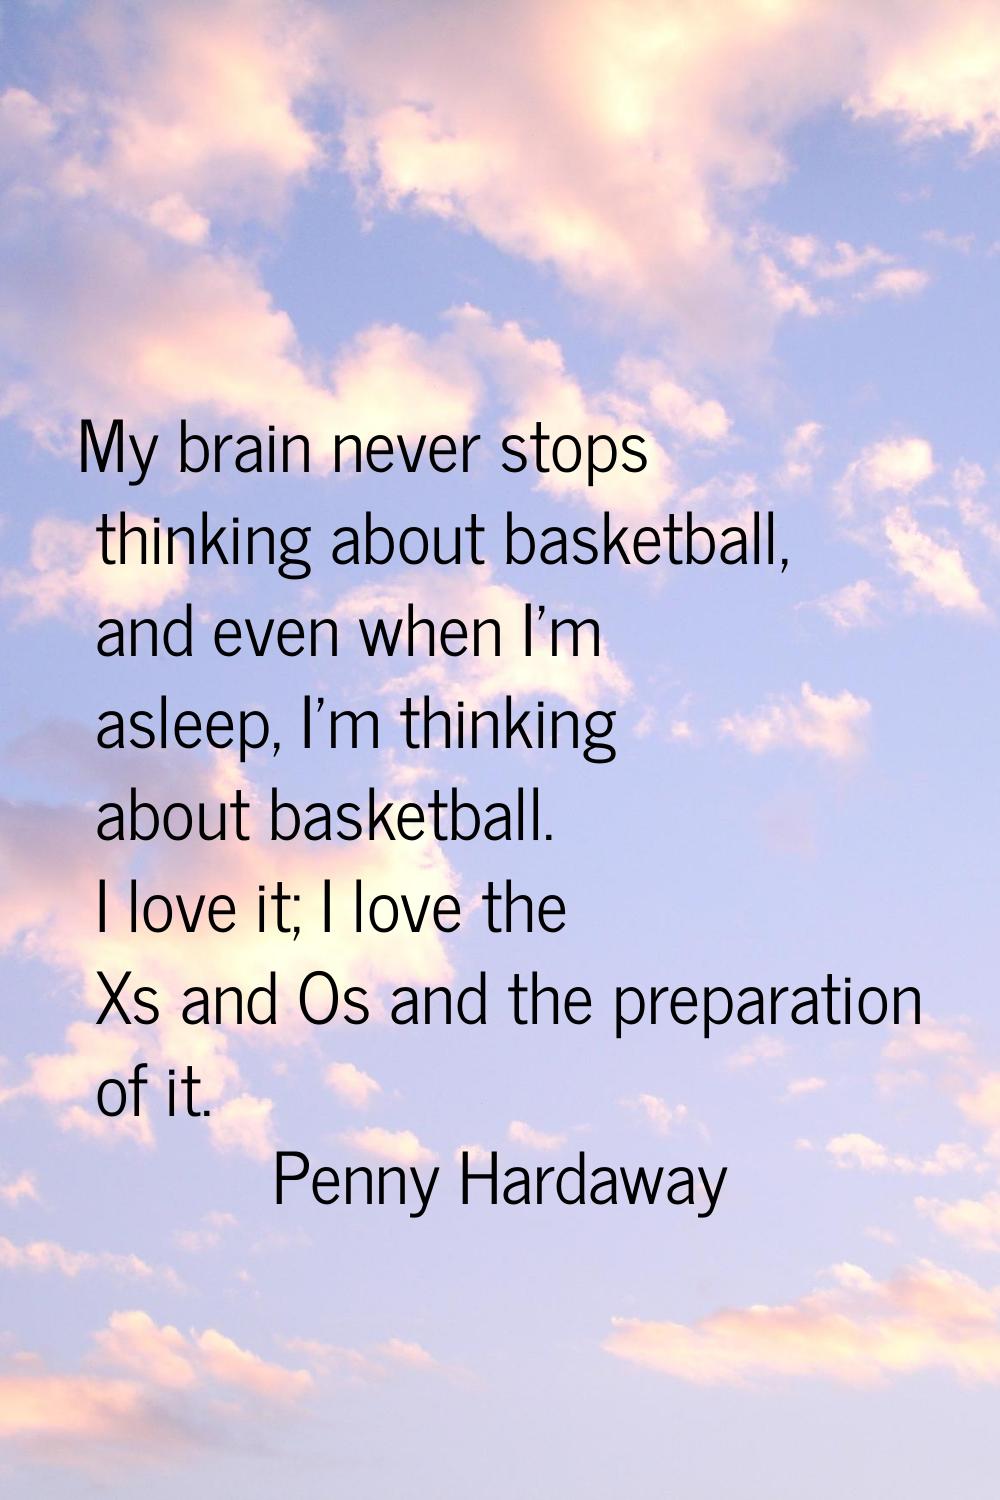 My brain never stops thinking about basketball, and even when I'm asleep, I'm thinking about basket